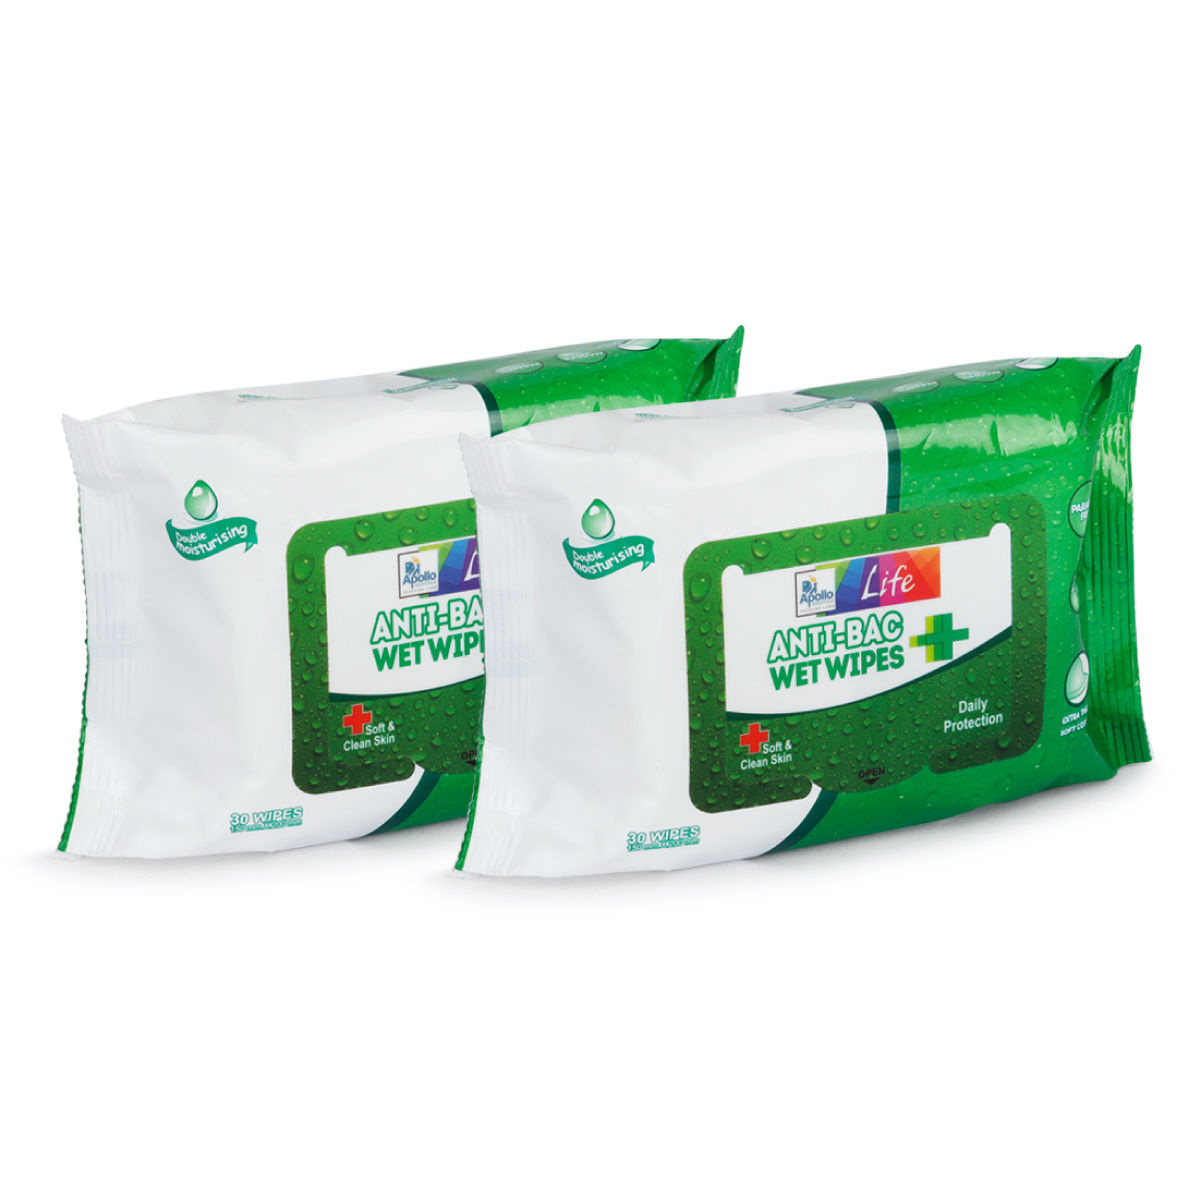 Buy Apollo Life Anti-Bac Wet Wipes, 60 Count (2x30 Wipes) Online